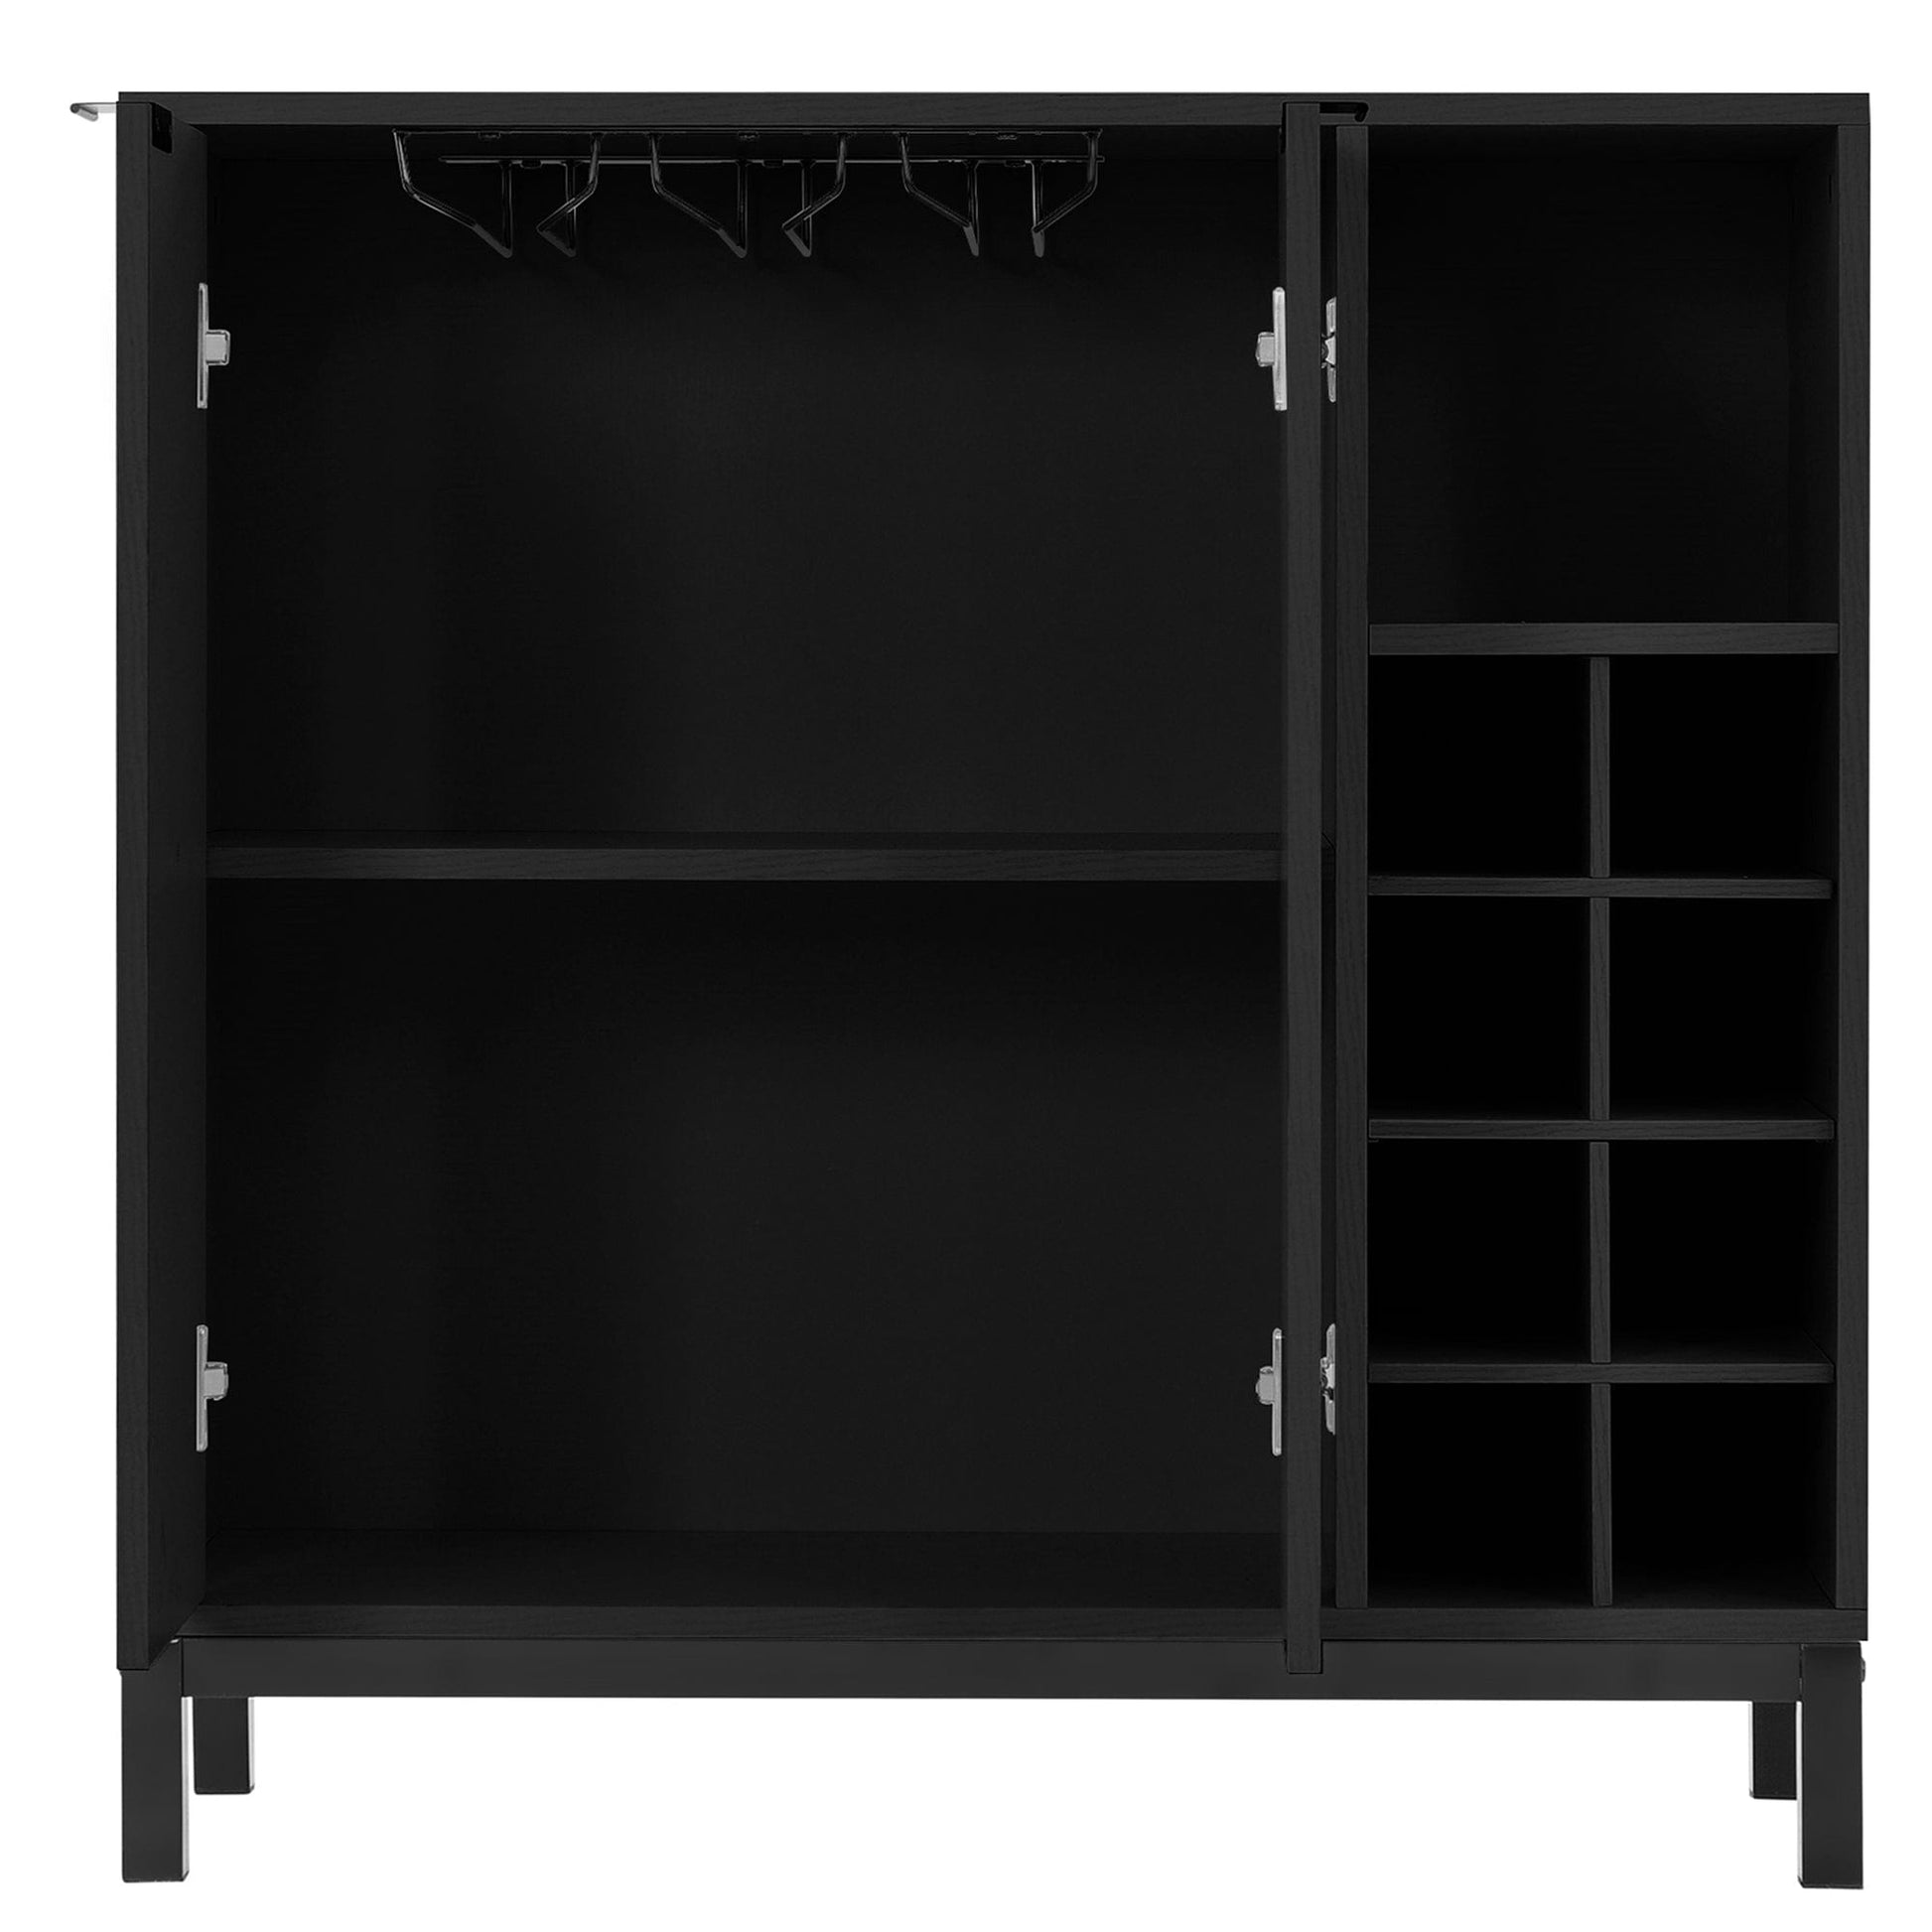 1st Choice Furniture Direct sideboards and Buffets 1st Choice Sideboards & Buffets Cabinet Wine Racks Server in Black